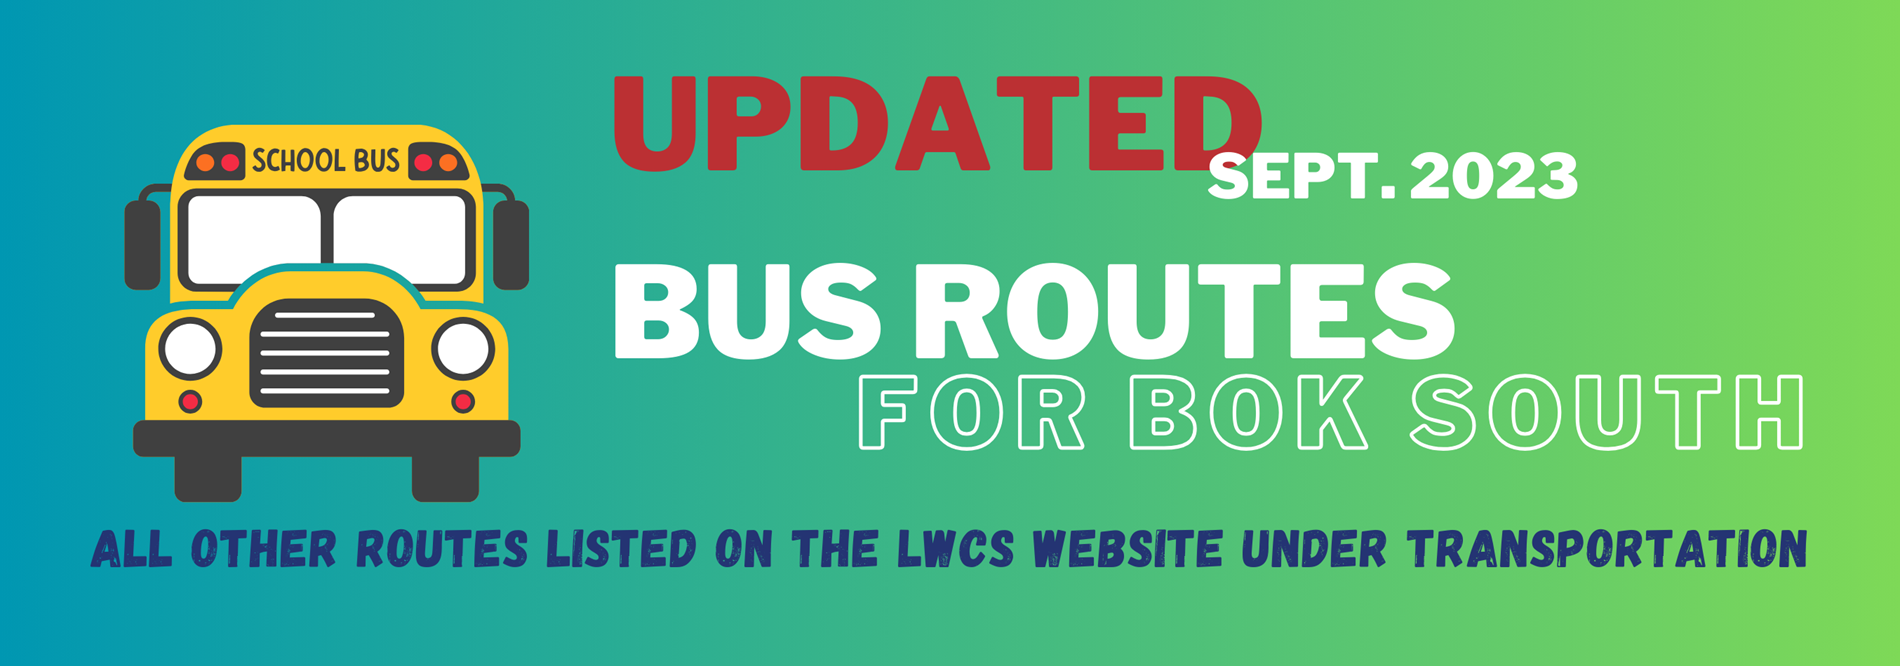 Bus route updated September 2023